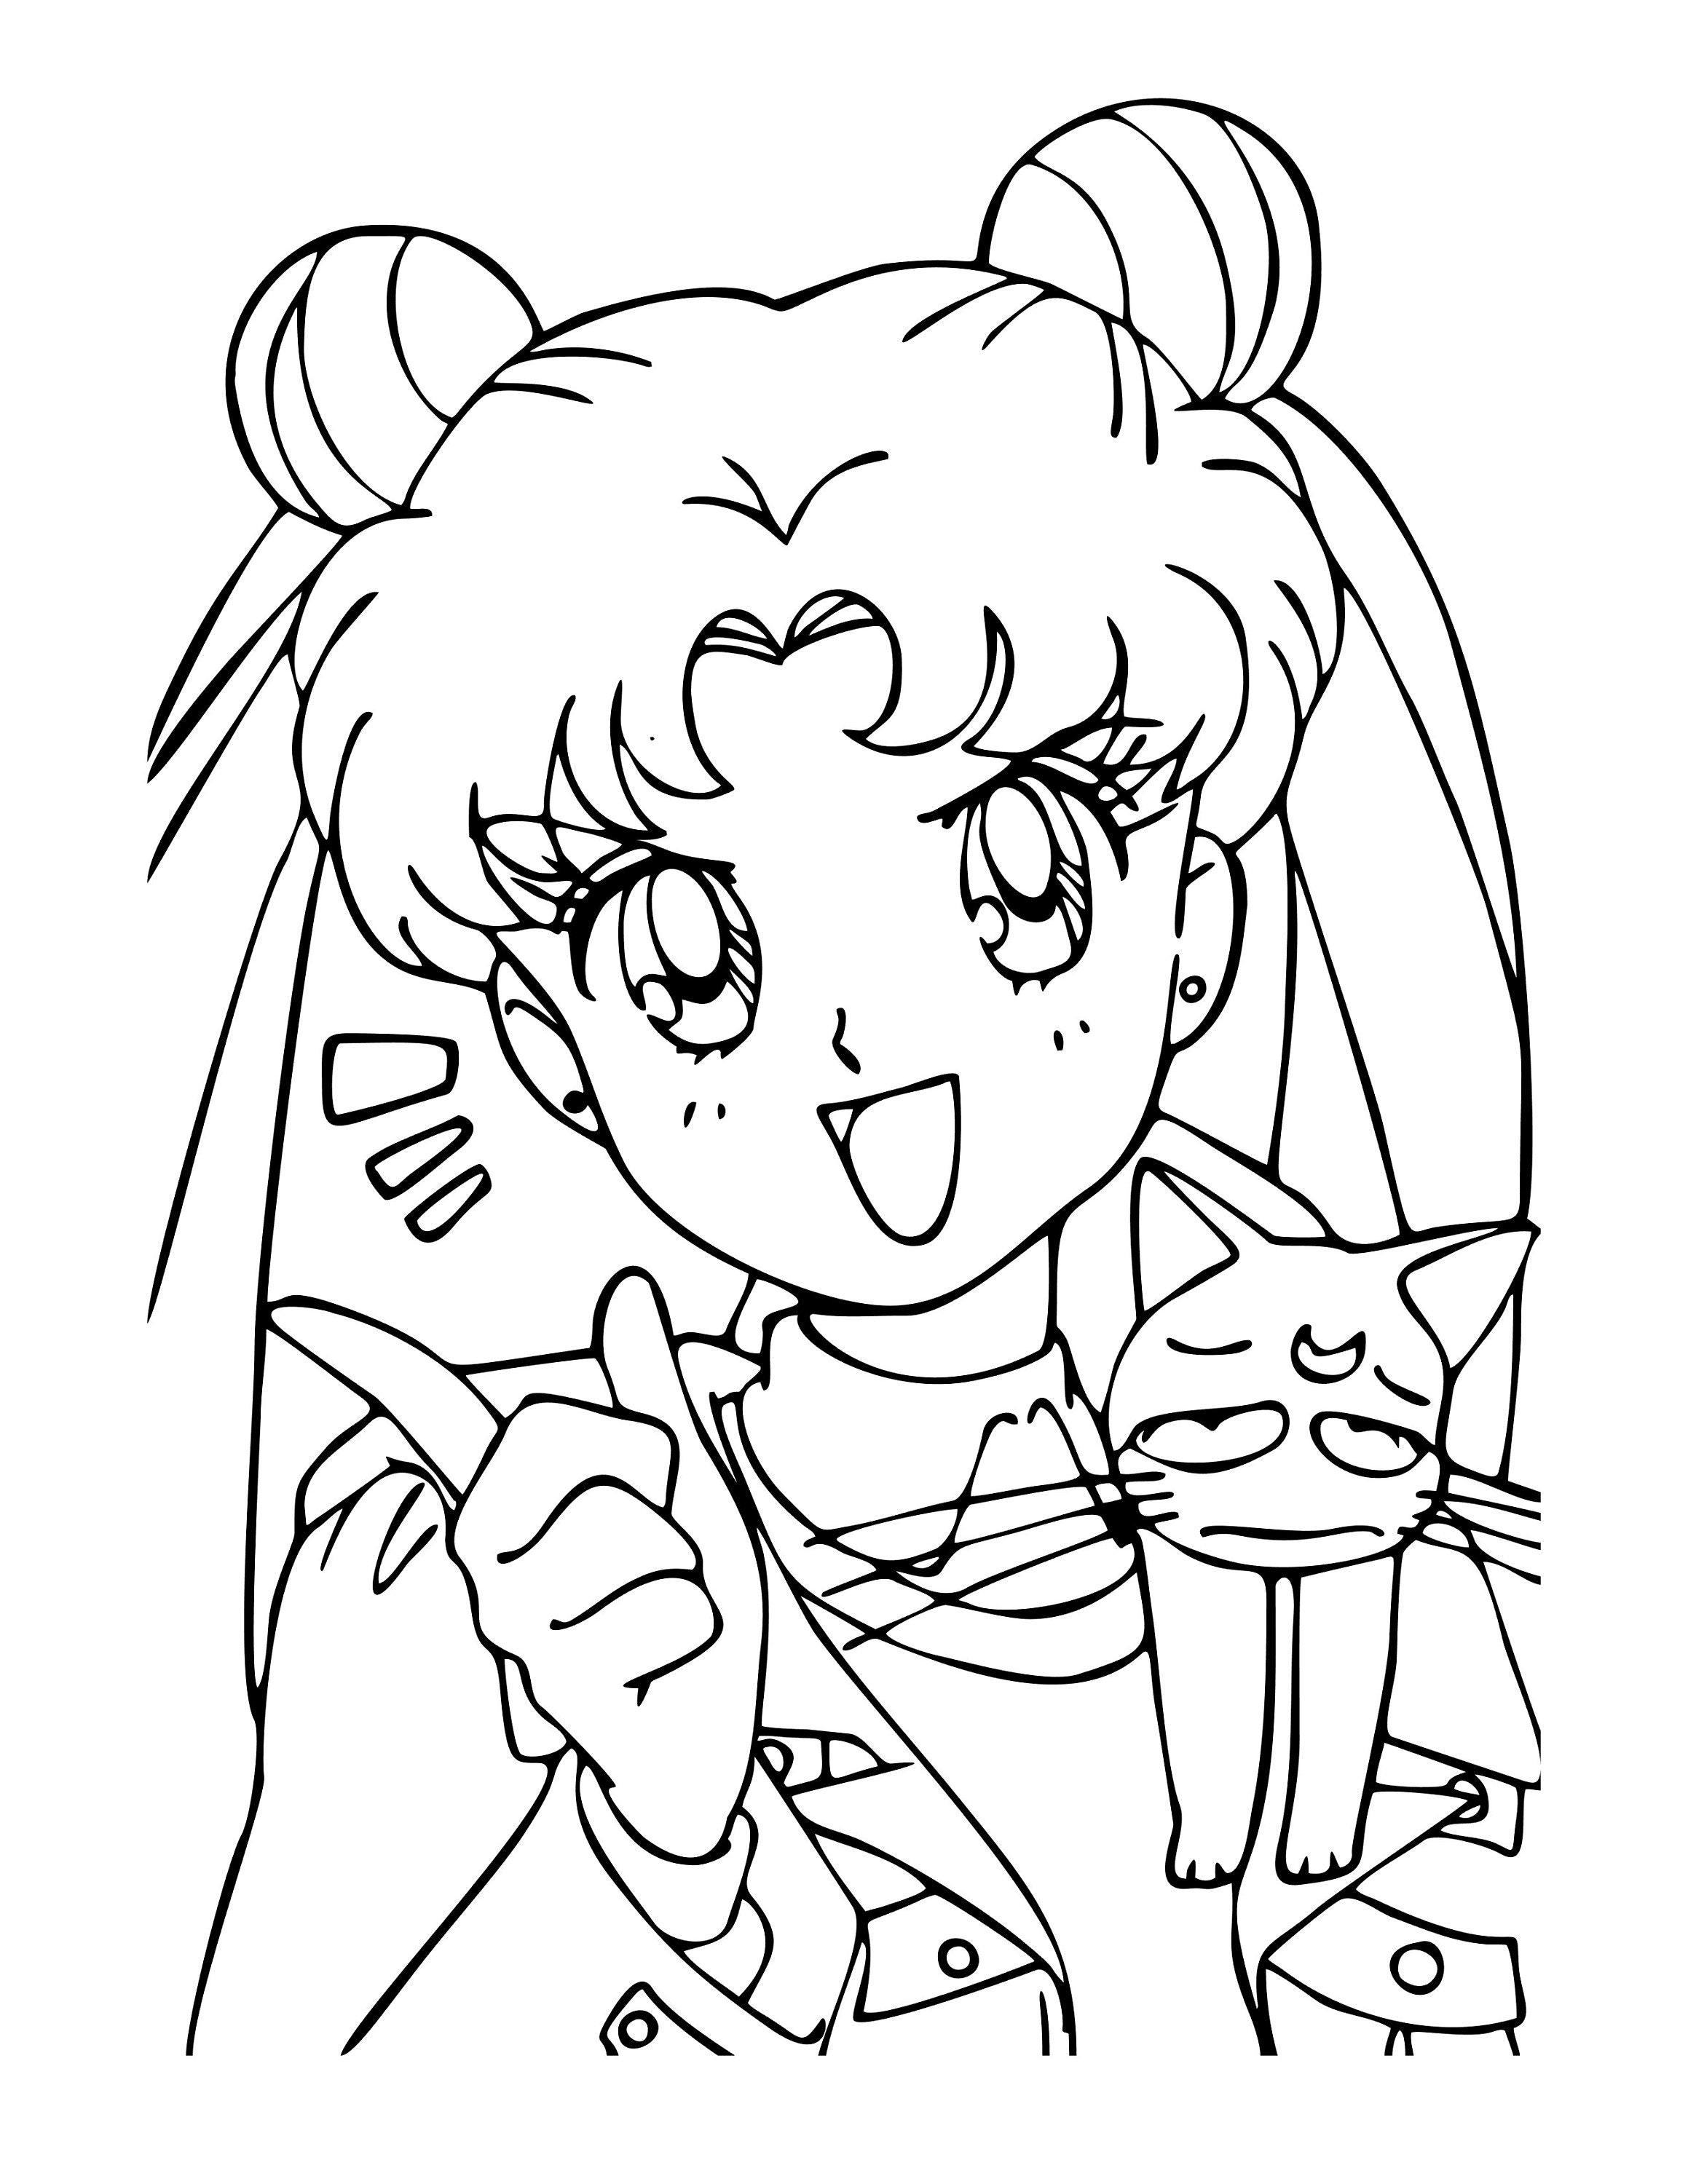 Sailor Moon Anime Coloring Pages Fun for Kids and All Ages - Etsy